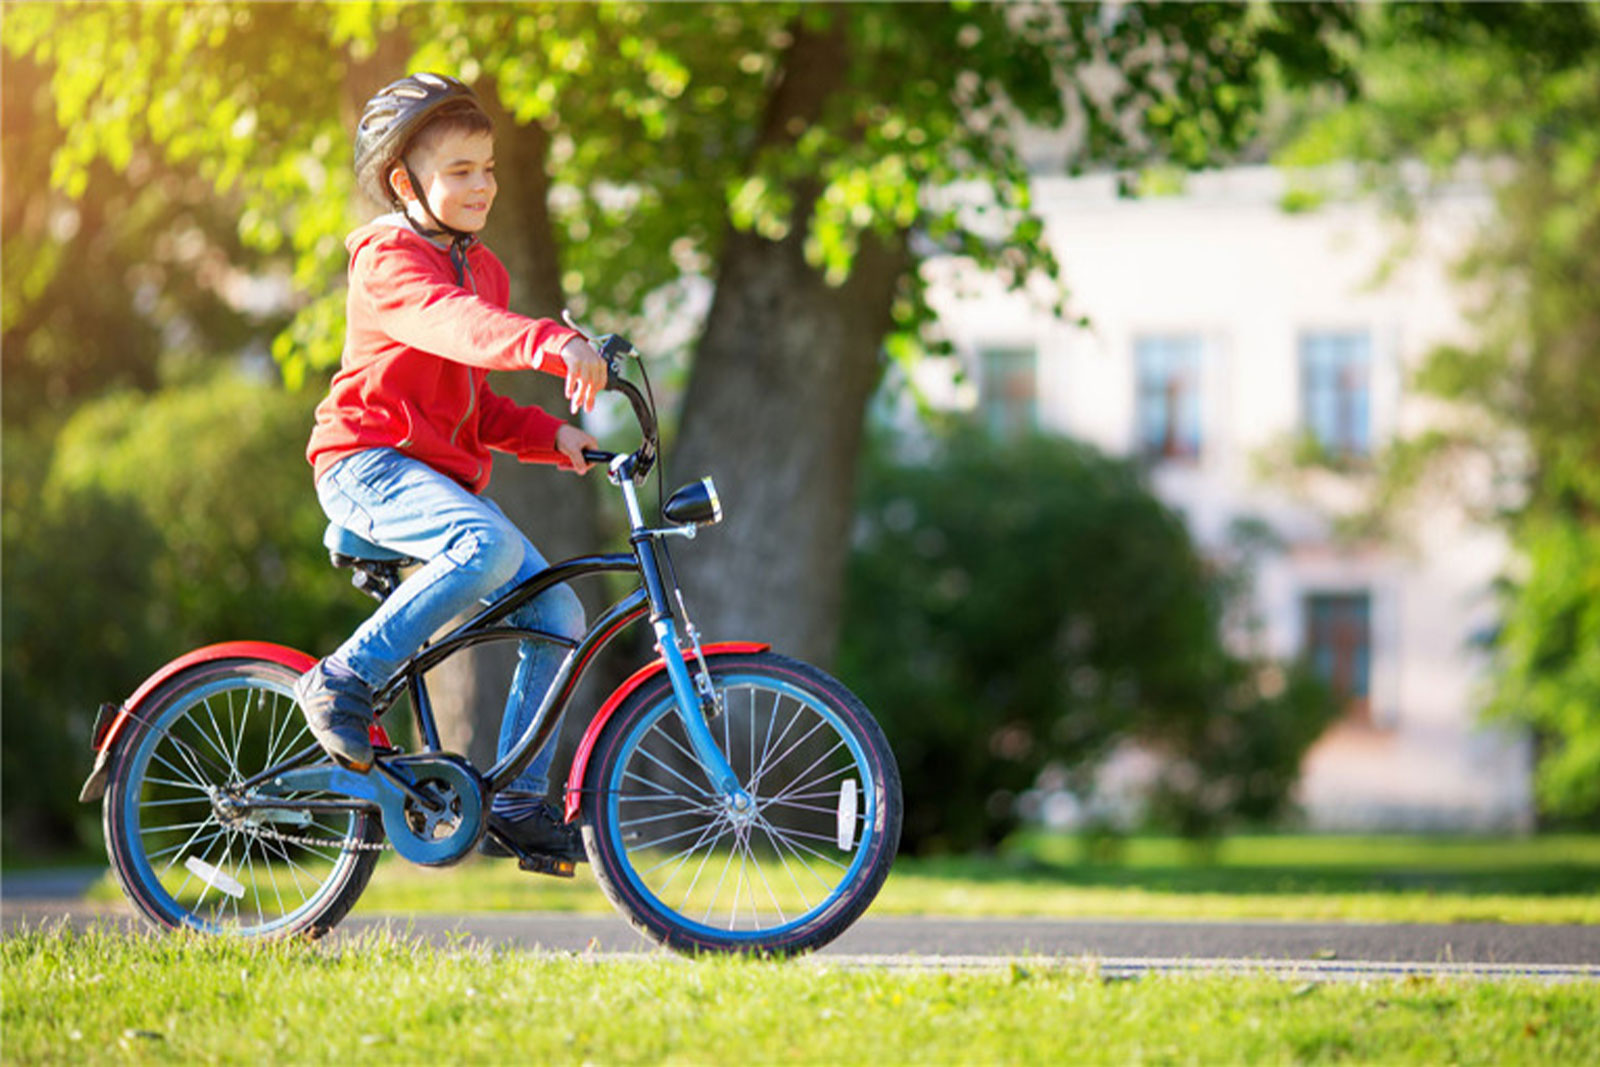 How much do you know about children’s riding safety